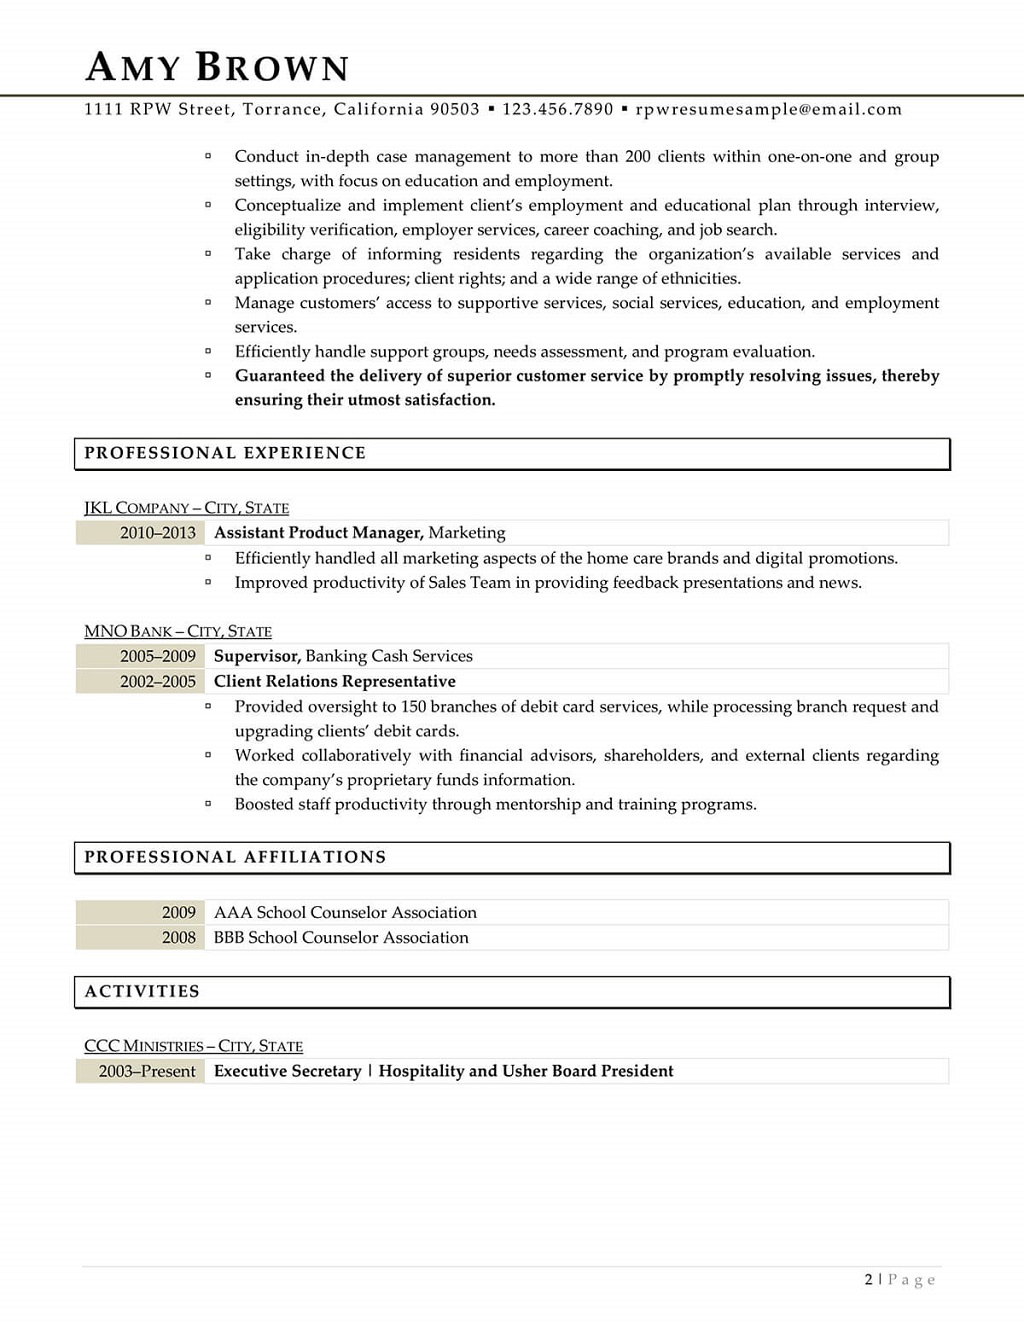 School Counselor Resume Page 2